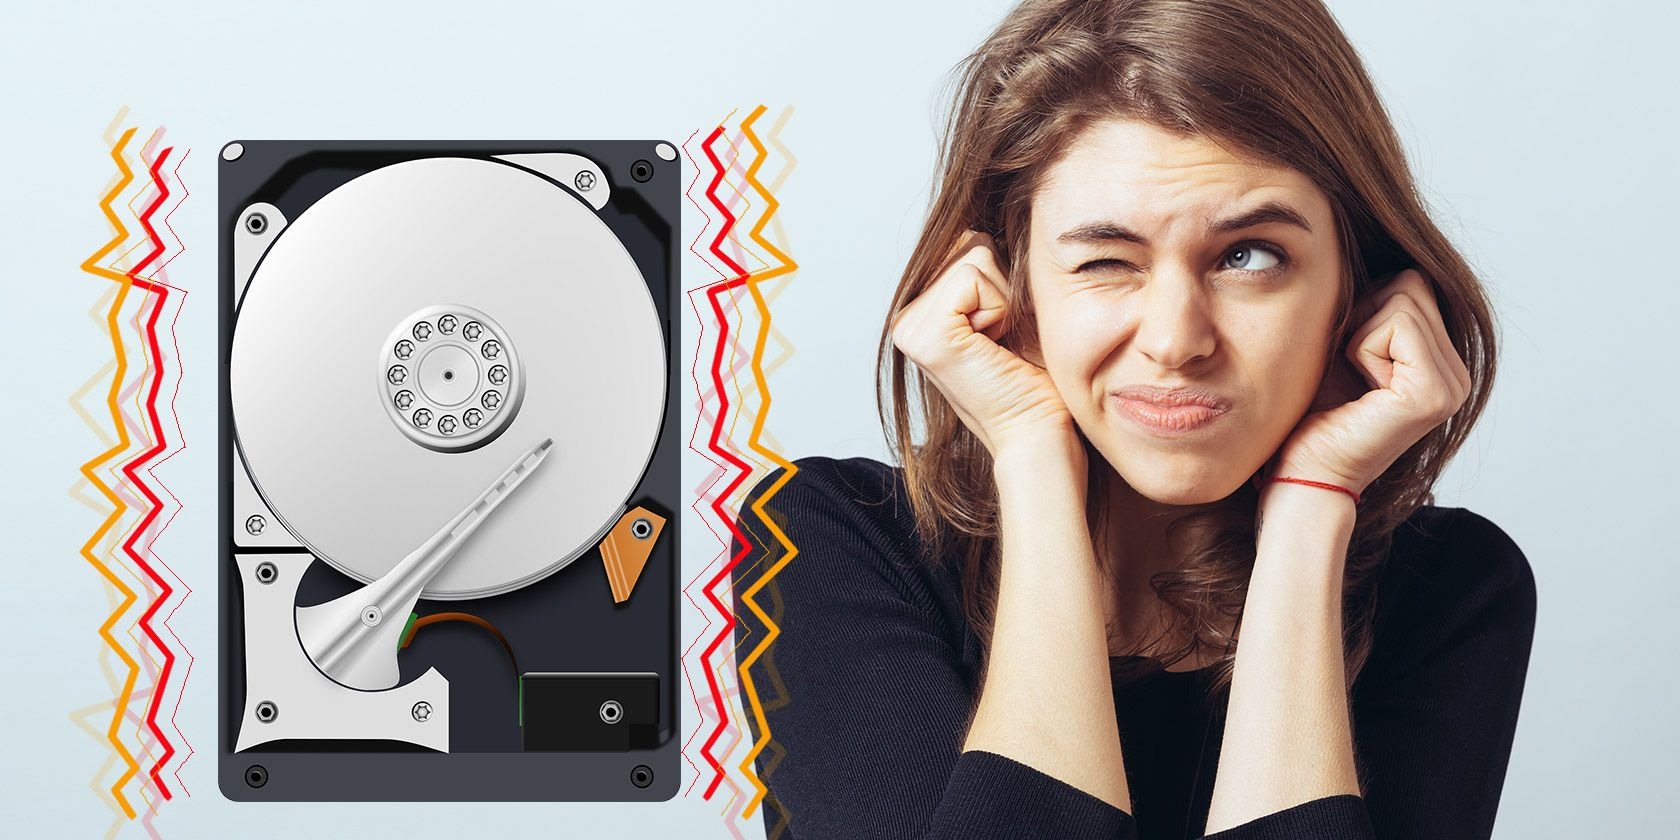 What To Do When Your Hard Drive Is Making Noise